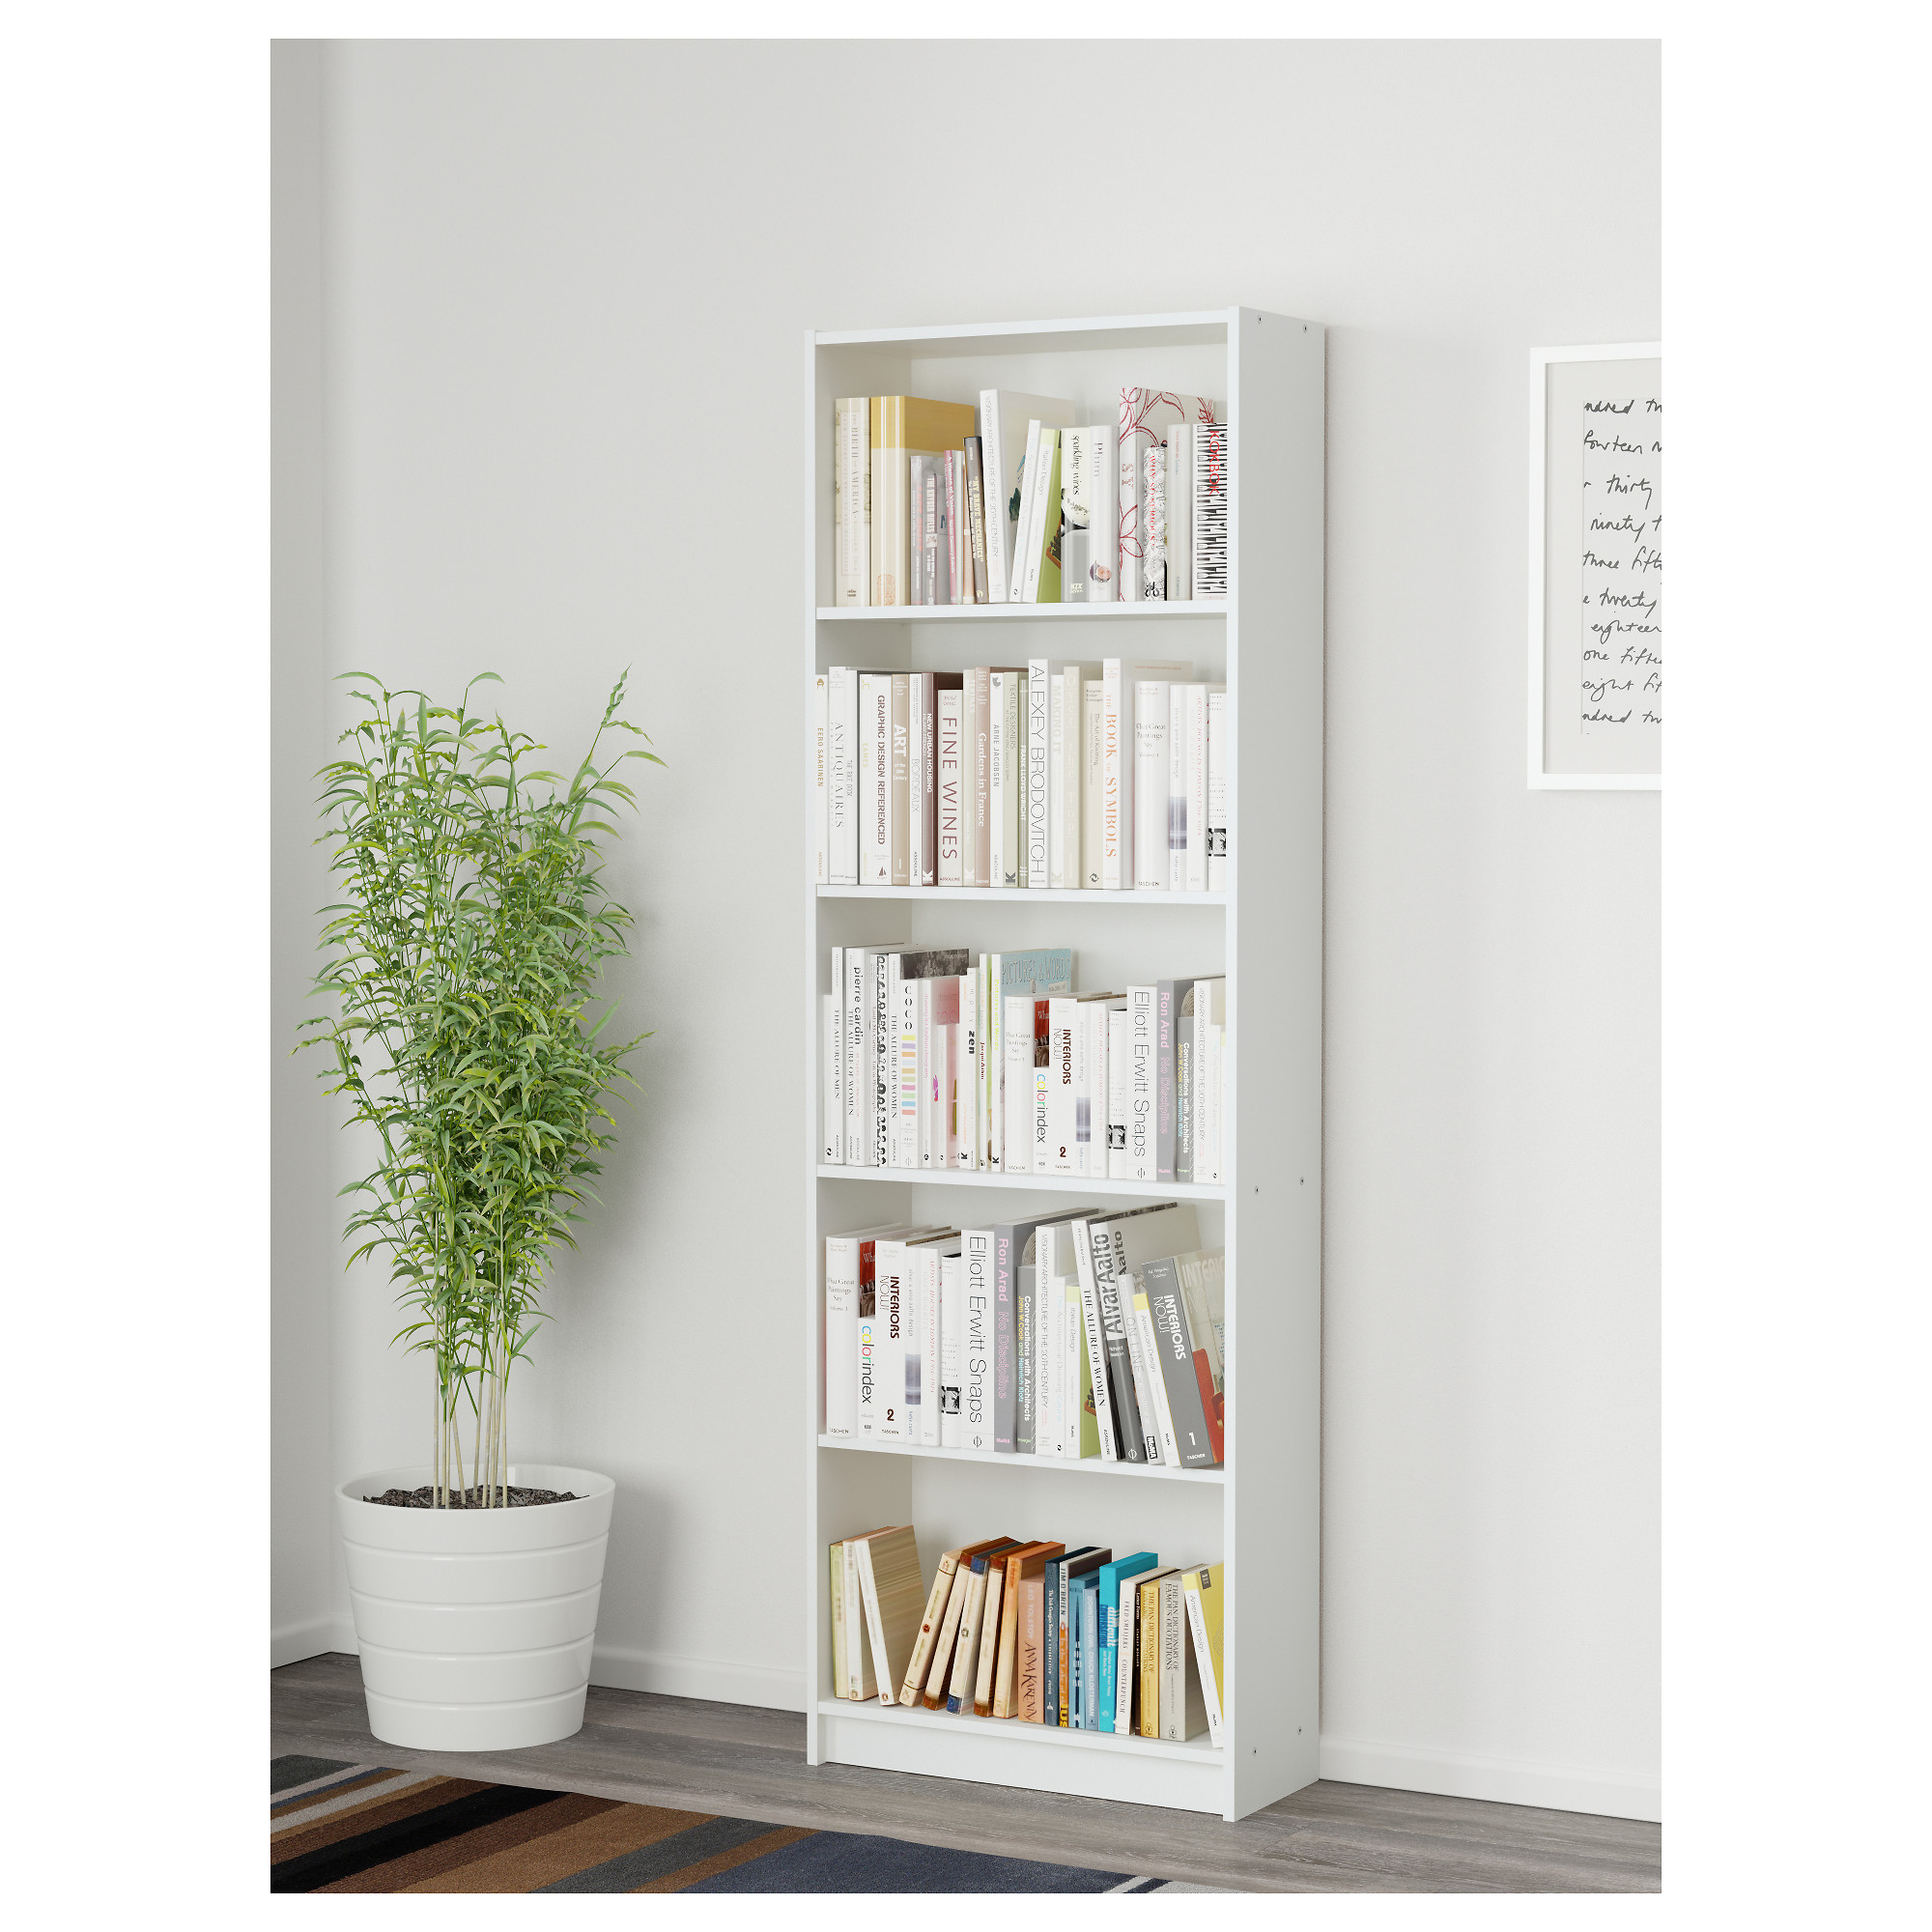 GERSBY bookcase